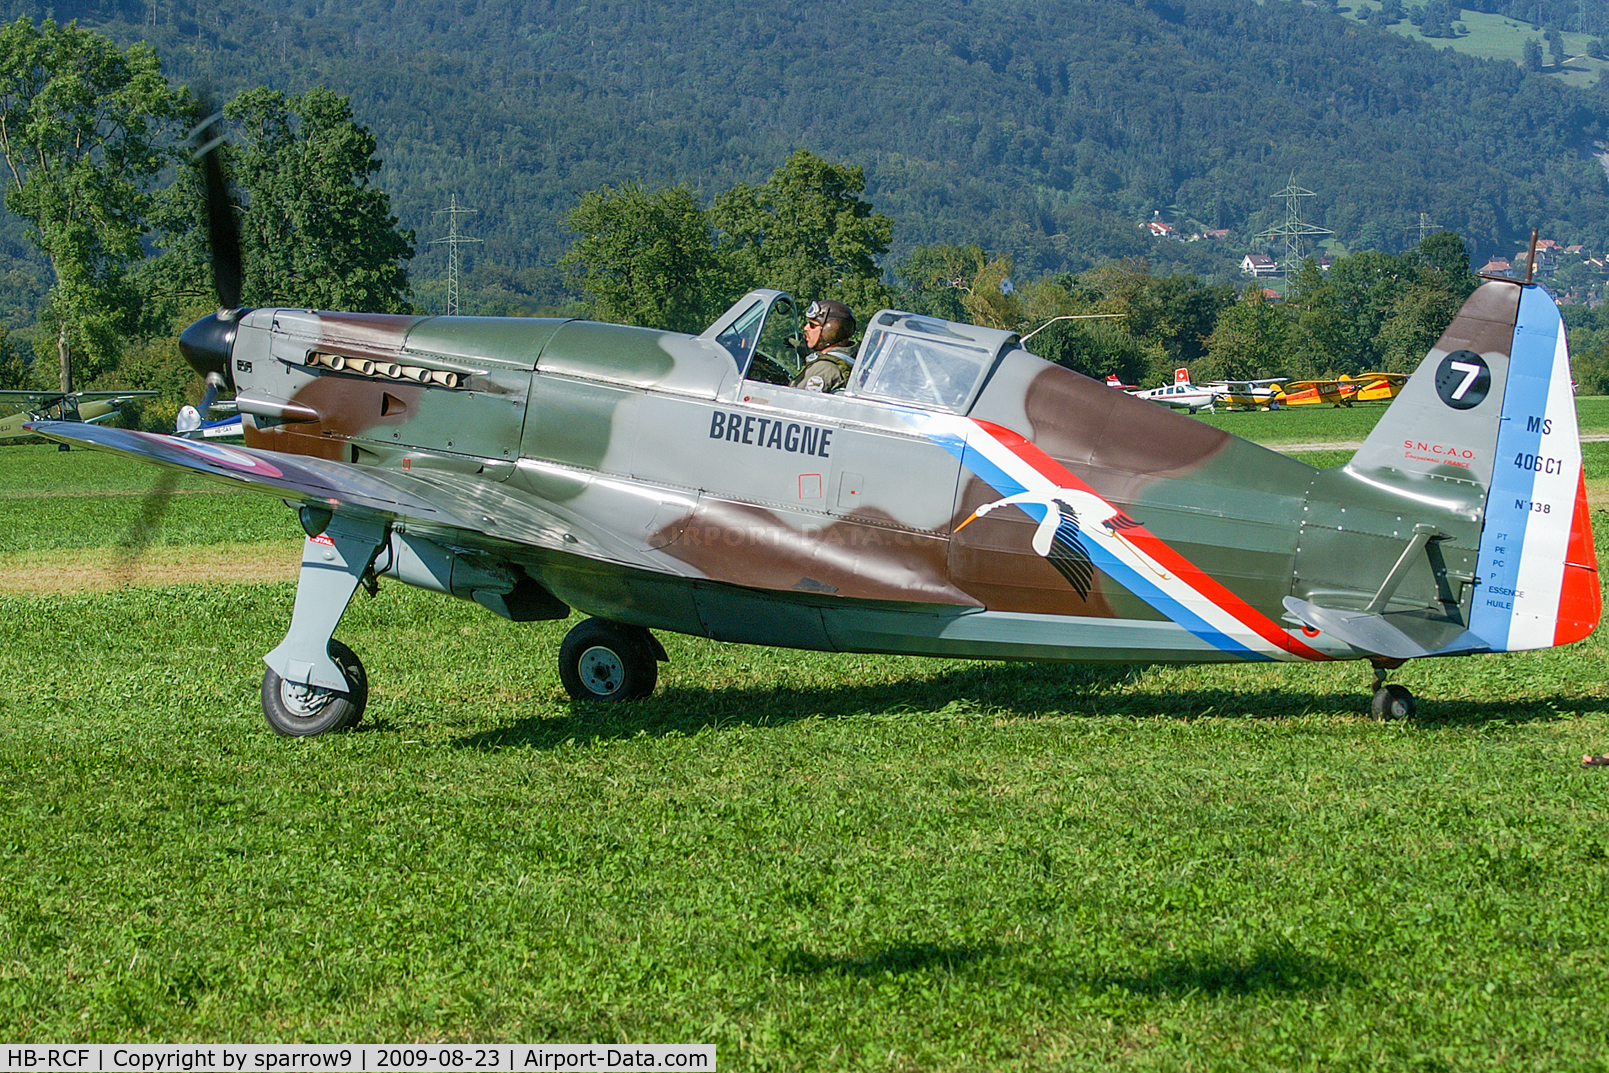 HB-RCF, 1942 Morane-Saulnier D-3801 (MS-412) C/N 194, Rebuilt with parts of J-84,J-276 and J-143. Painted in the colors of the aircraft of Cmdr Coadou,